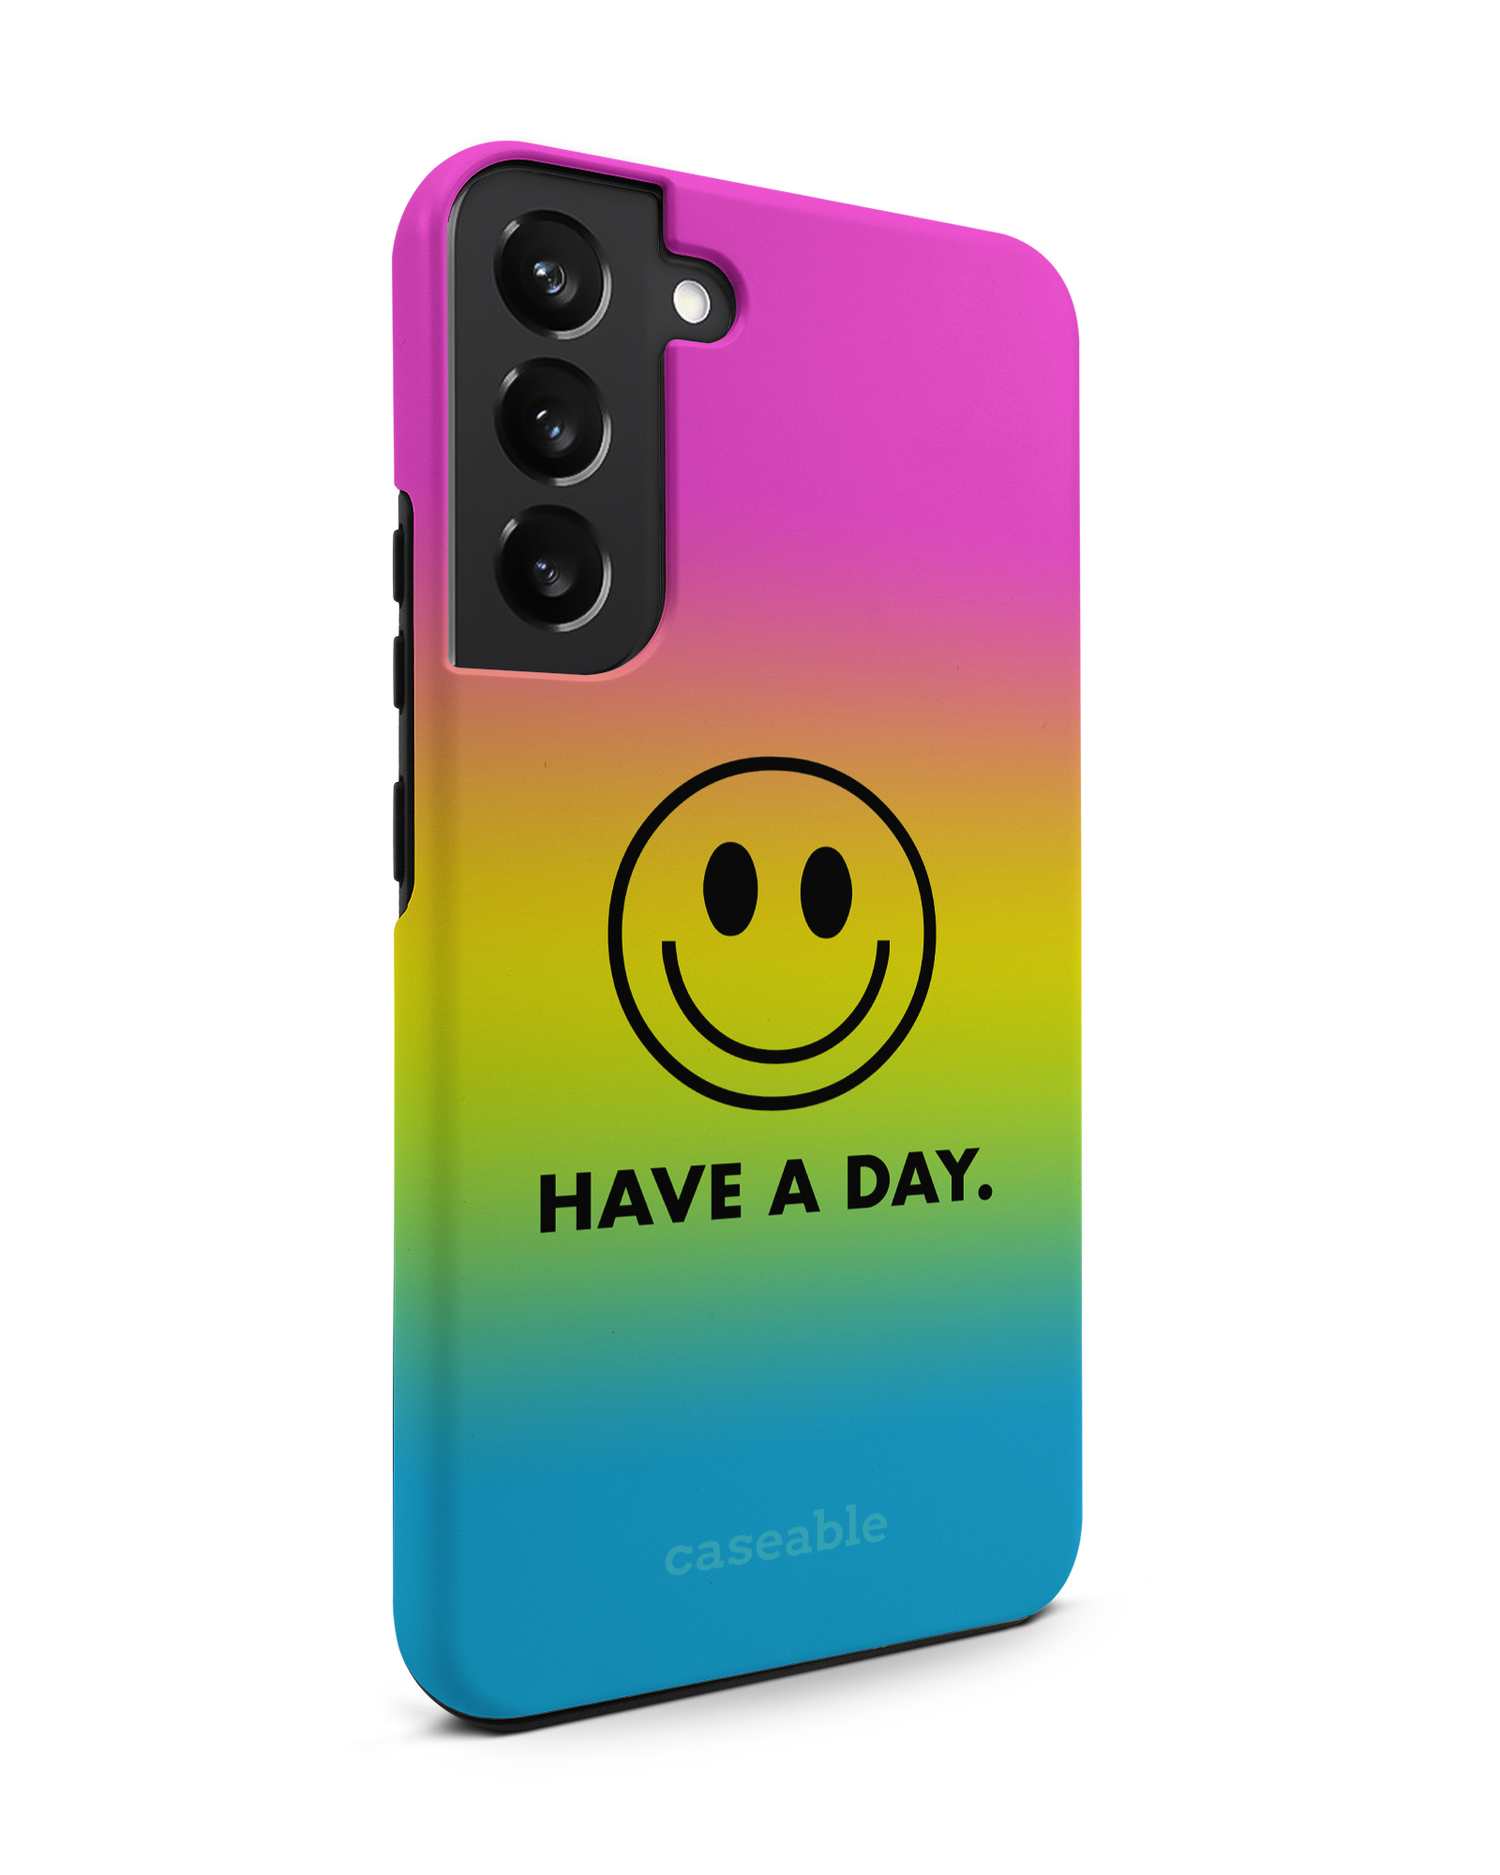 Have A Day Premium Phone Case Samsung Galaxy S22 Plus 5G: View from the left side